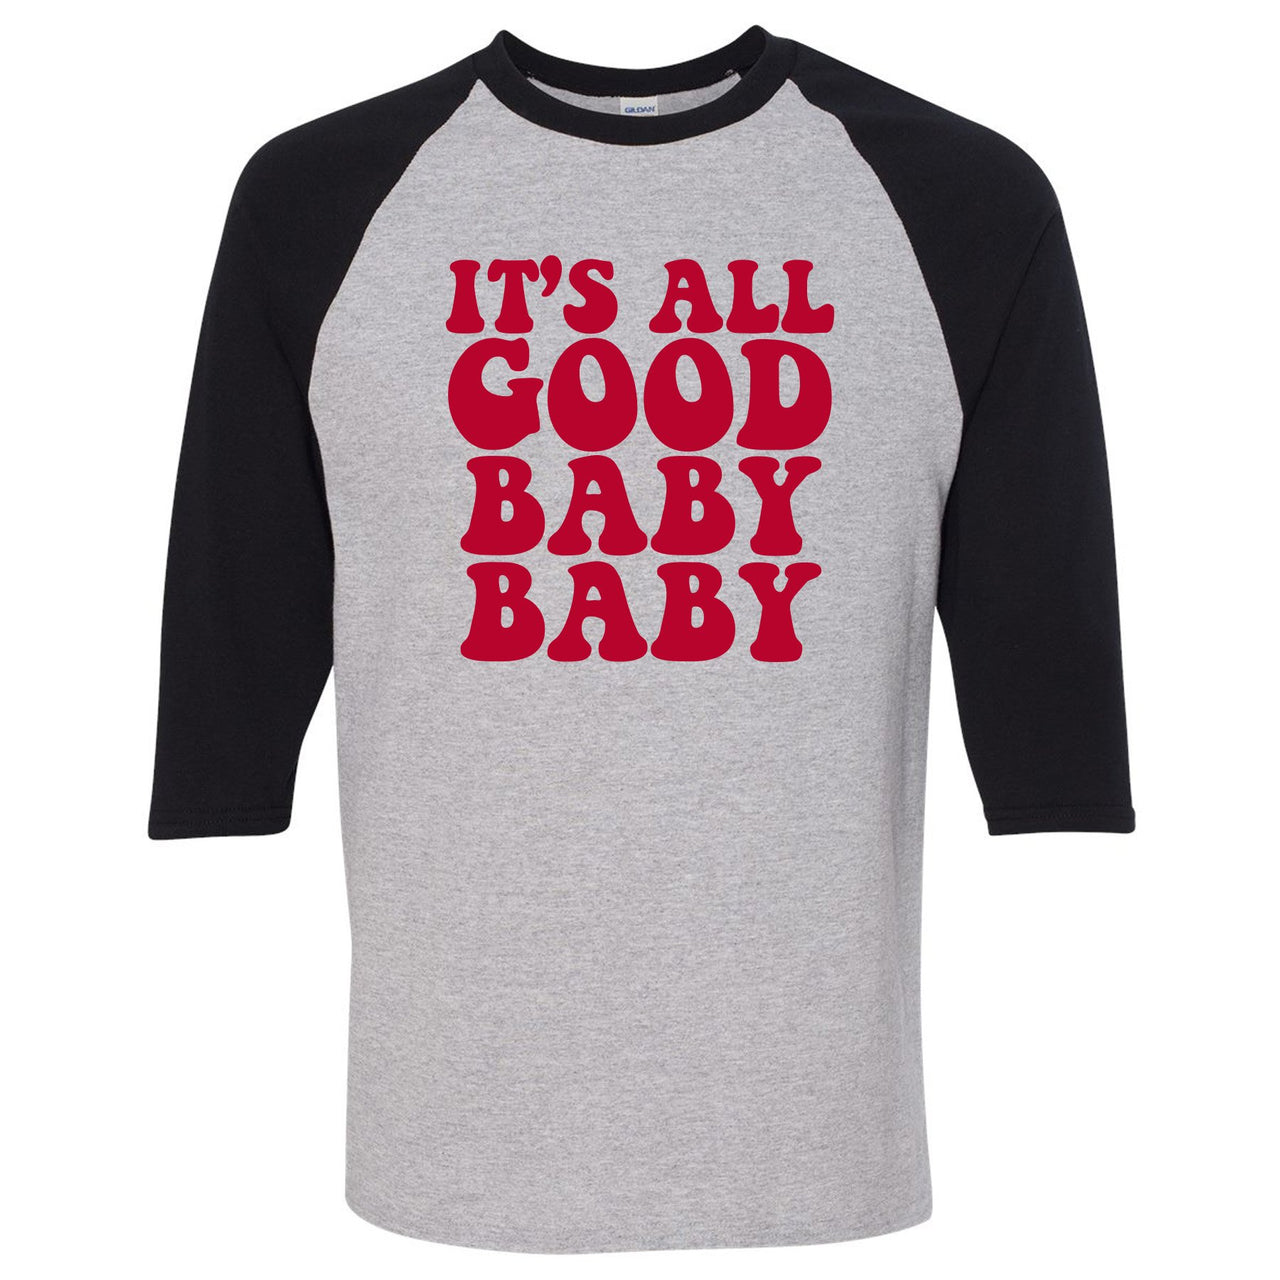 Bred 2019 4s Raglan T Shirt | It's All Good Baby Baby, Sports Grey and Black